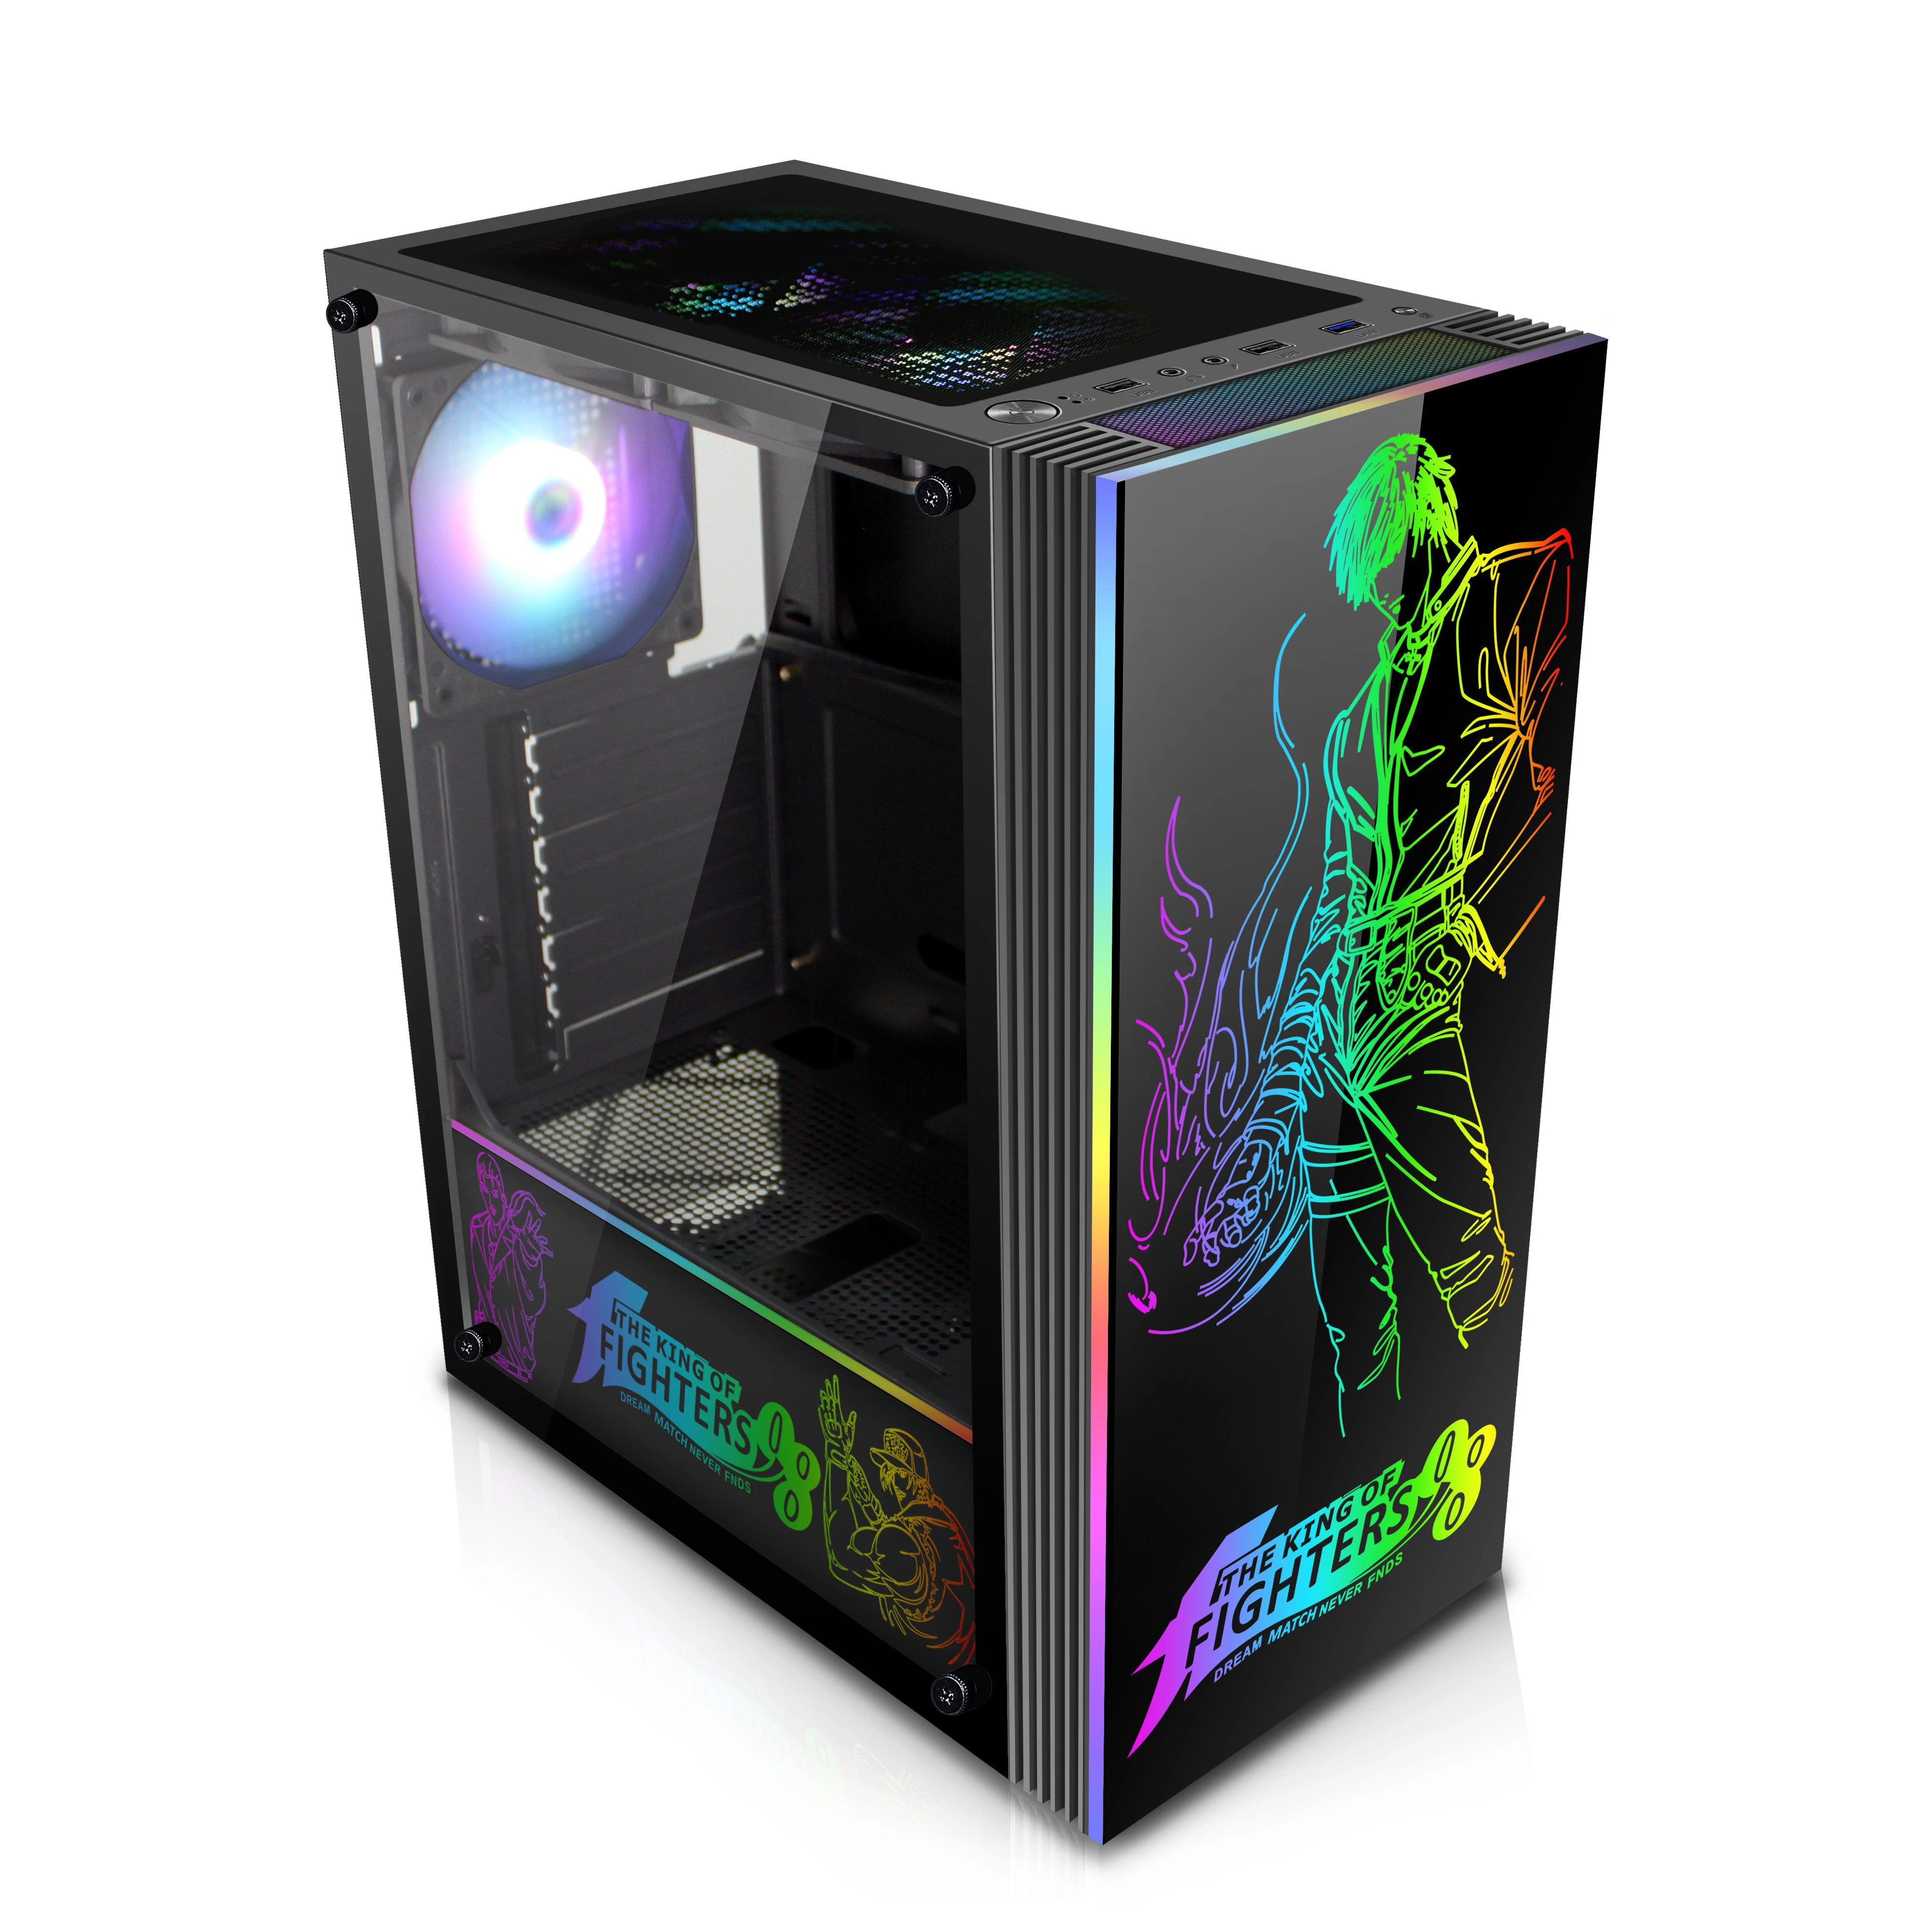 NEW ARRIVAL DAOFENG 3 Gaming PC Computer Case Casin Cabinet Hardware With 3 PCS RGB FAN